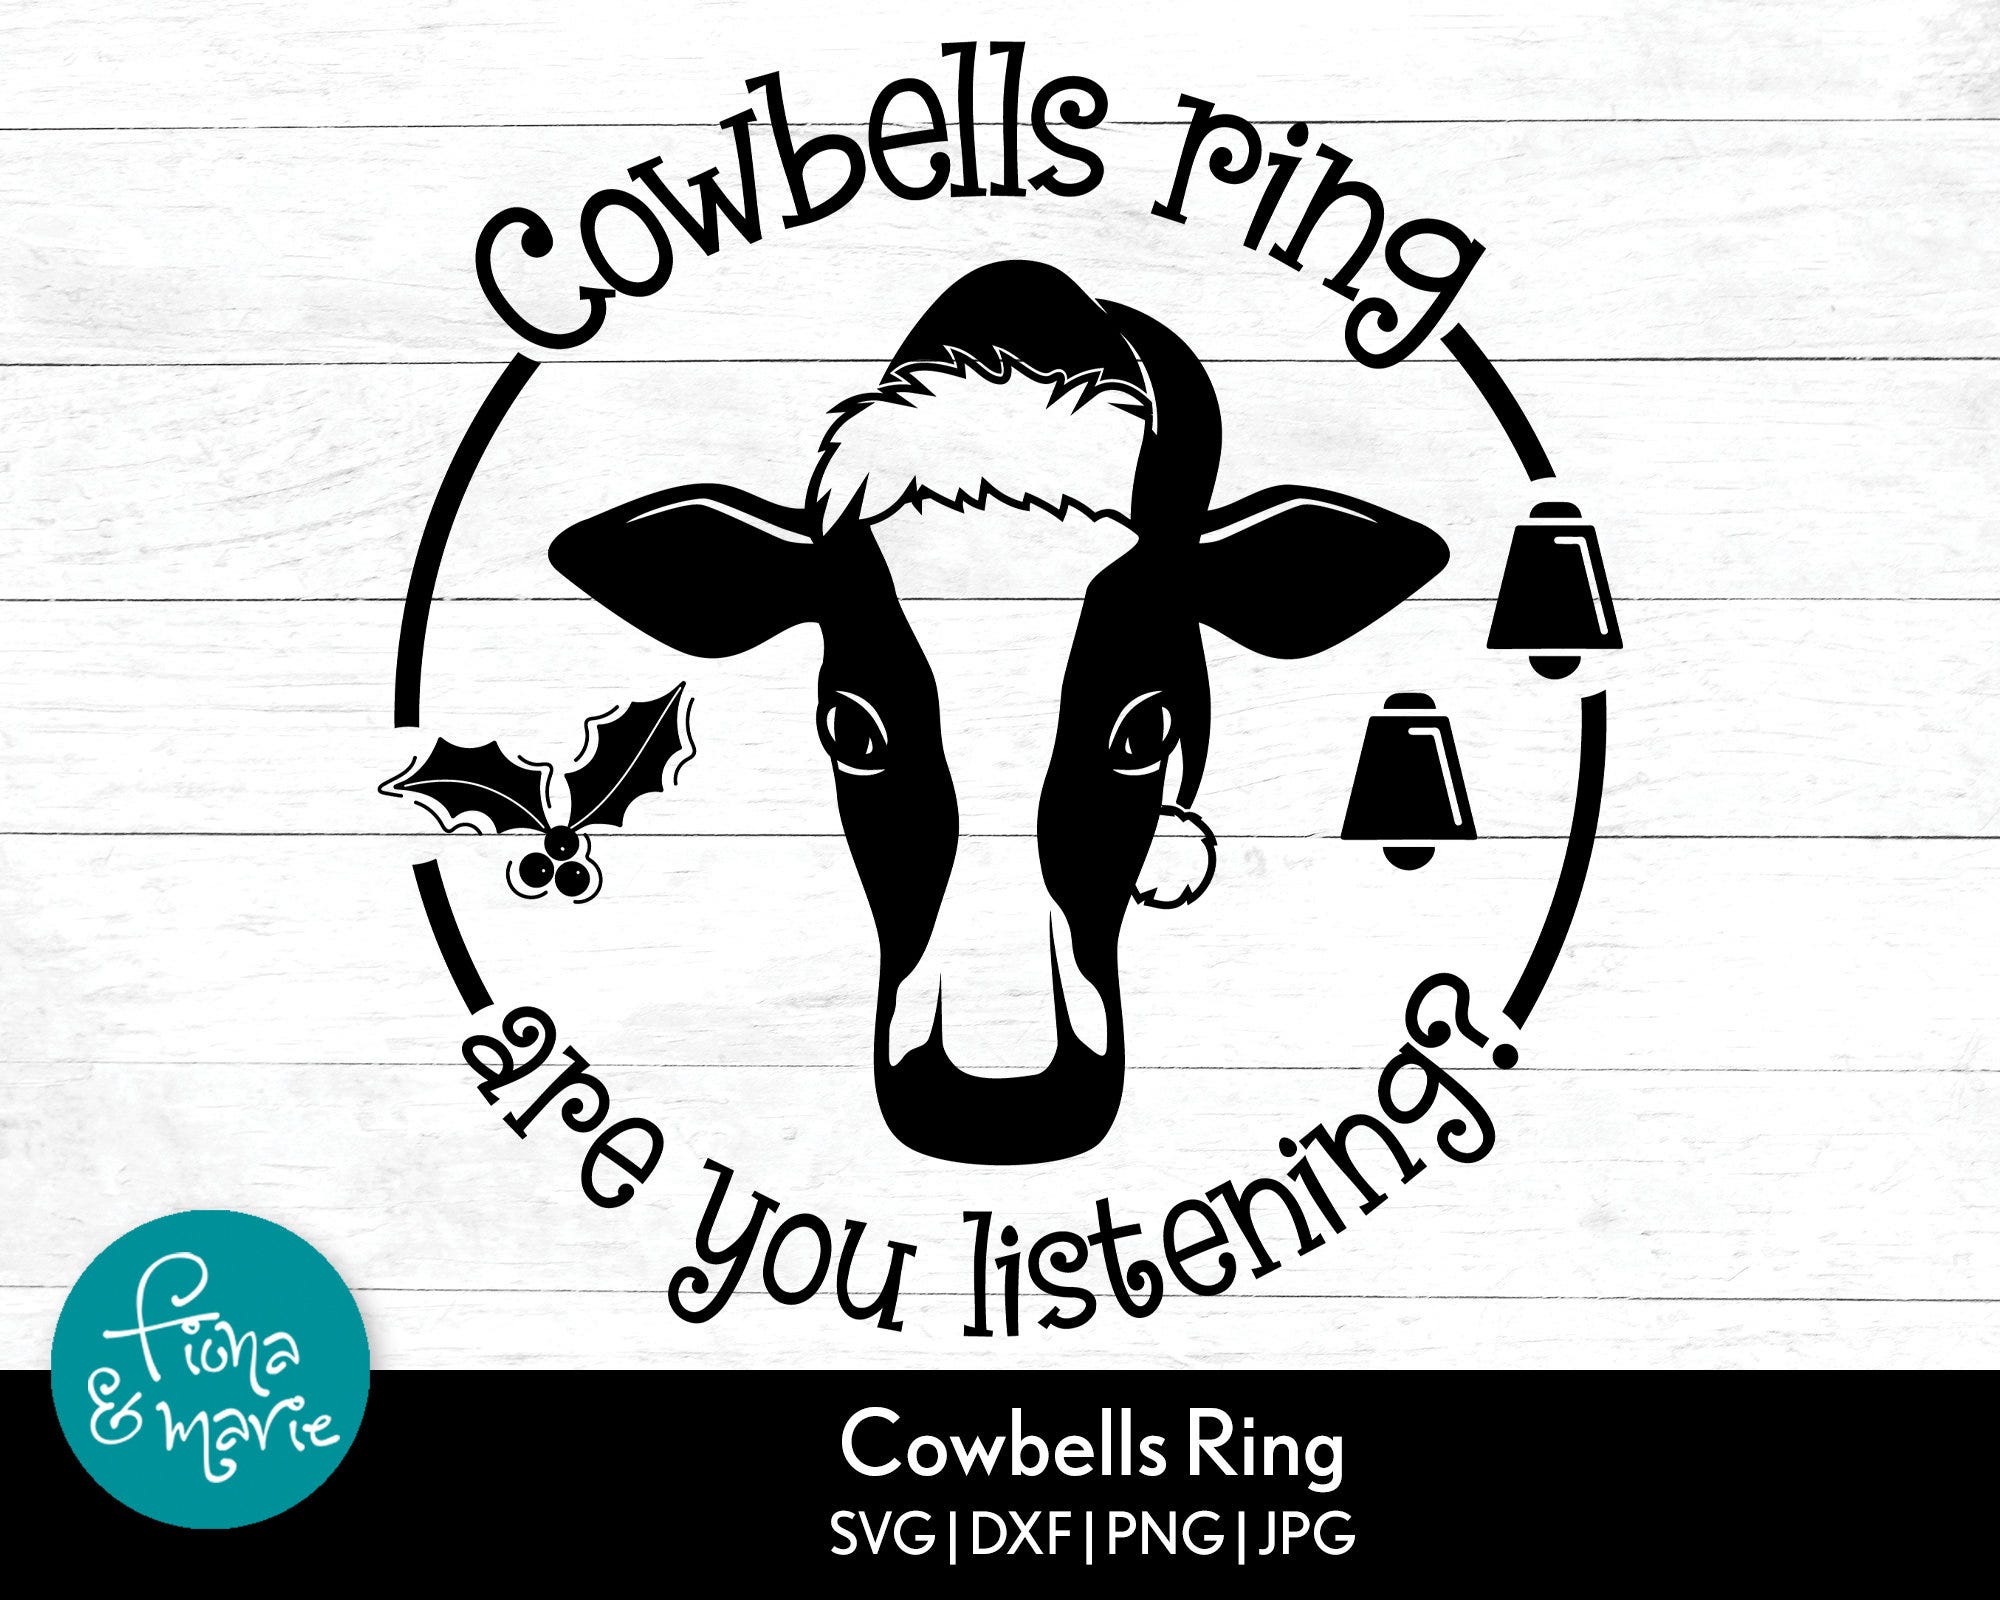 Cowbells ring are you listening svg | Cow Christmas svg | Farm Life | svg | png | jpg | dxf  | Cut File  | Digital Download